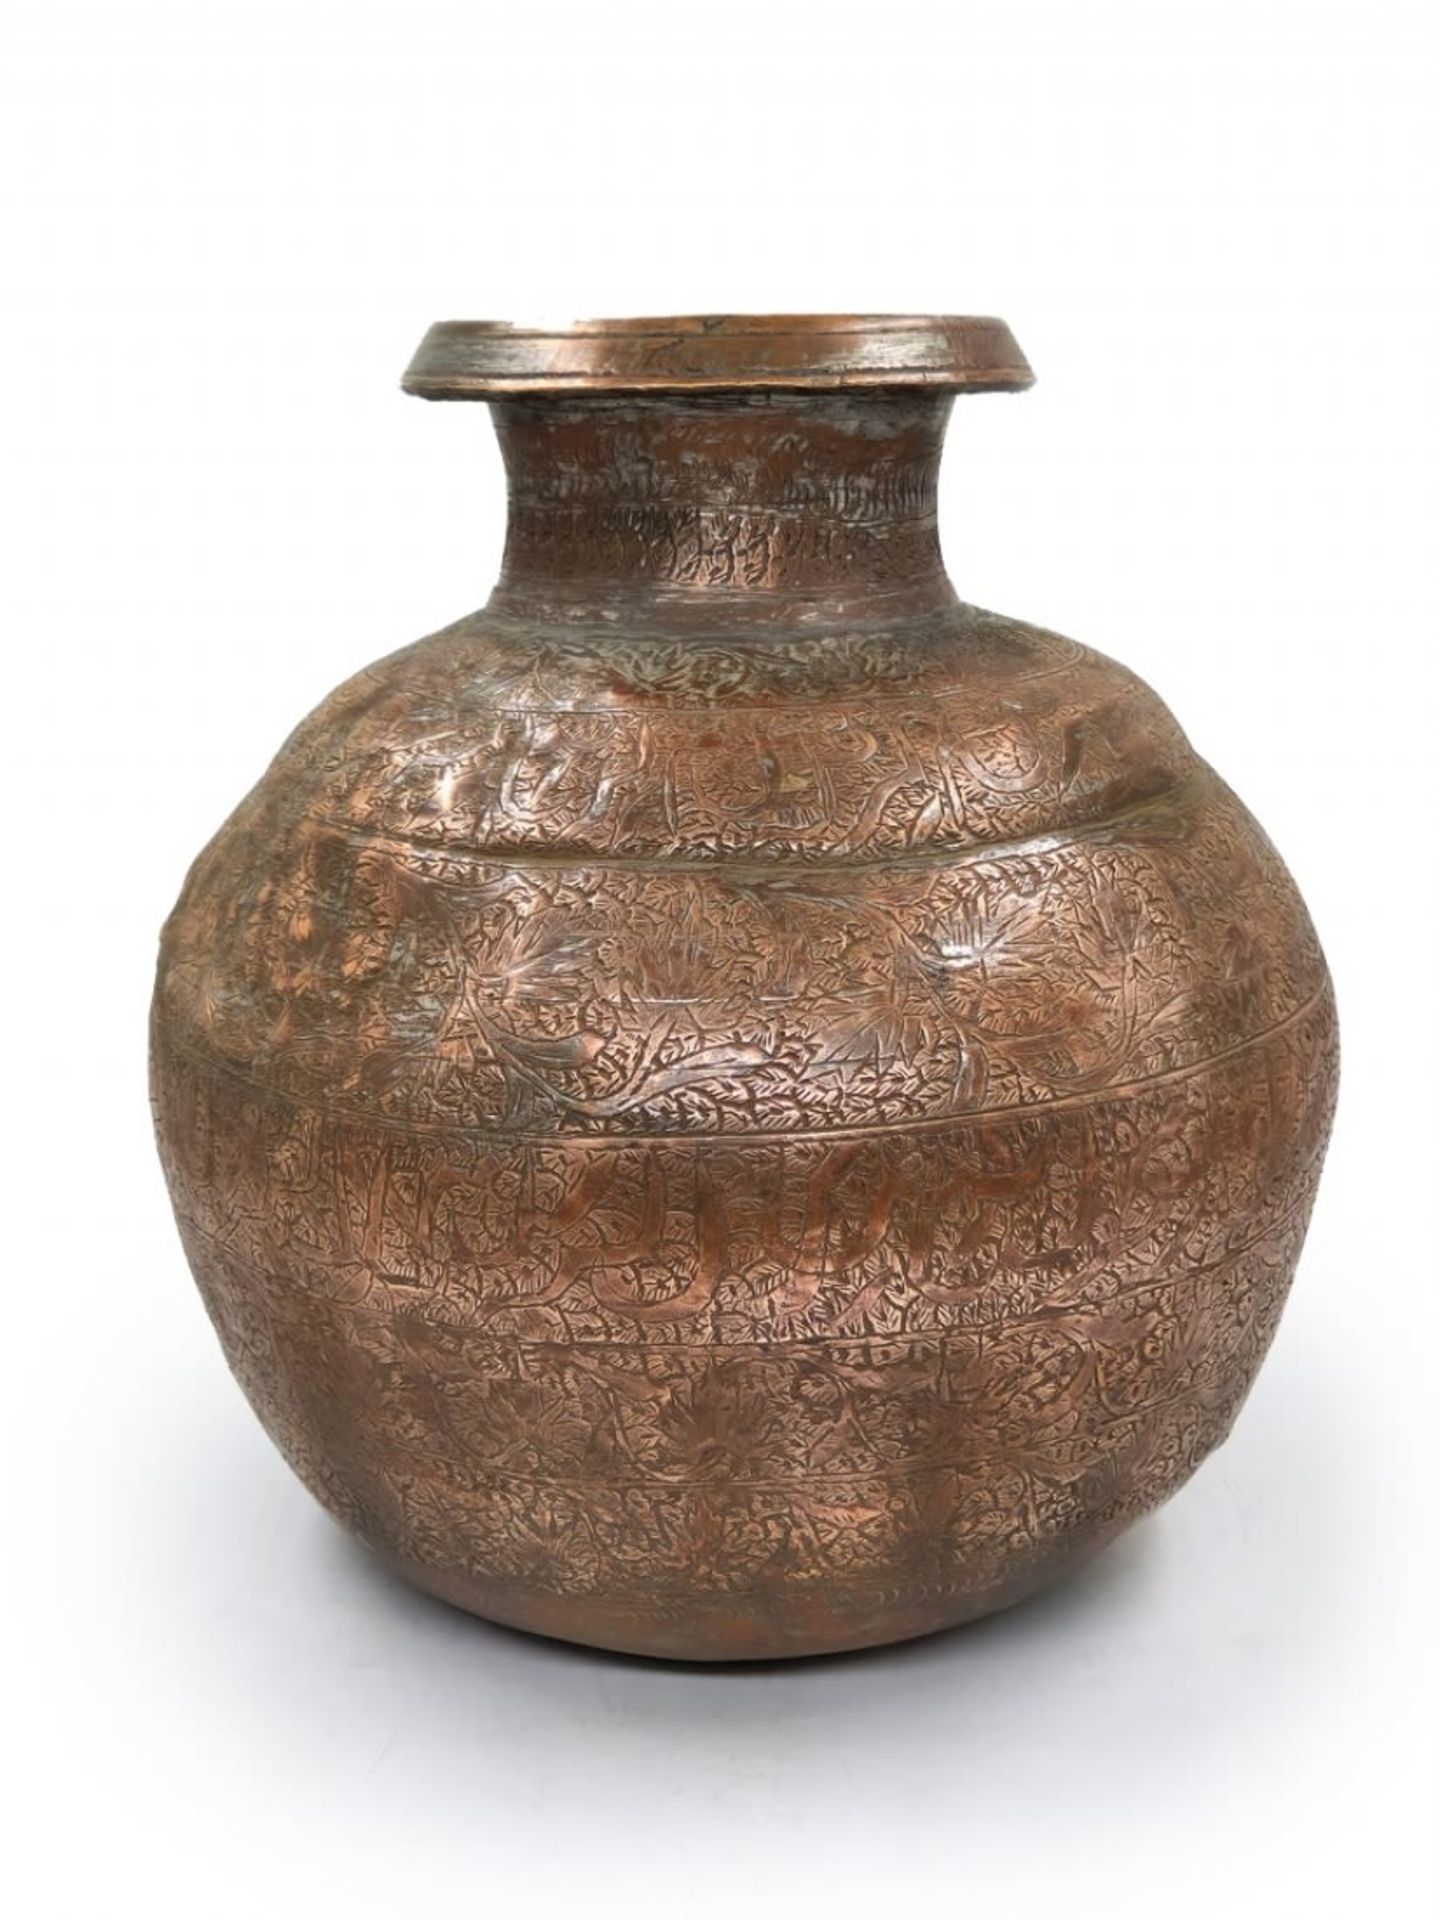 A large and beautiful antique Asian water jug from the 19th century, made in the Dhamrai region, - Image 2 of 8